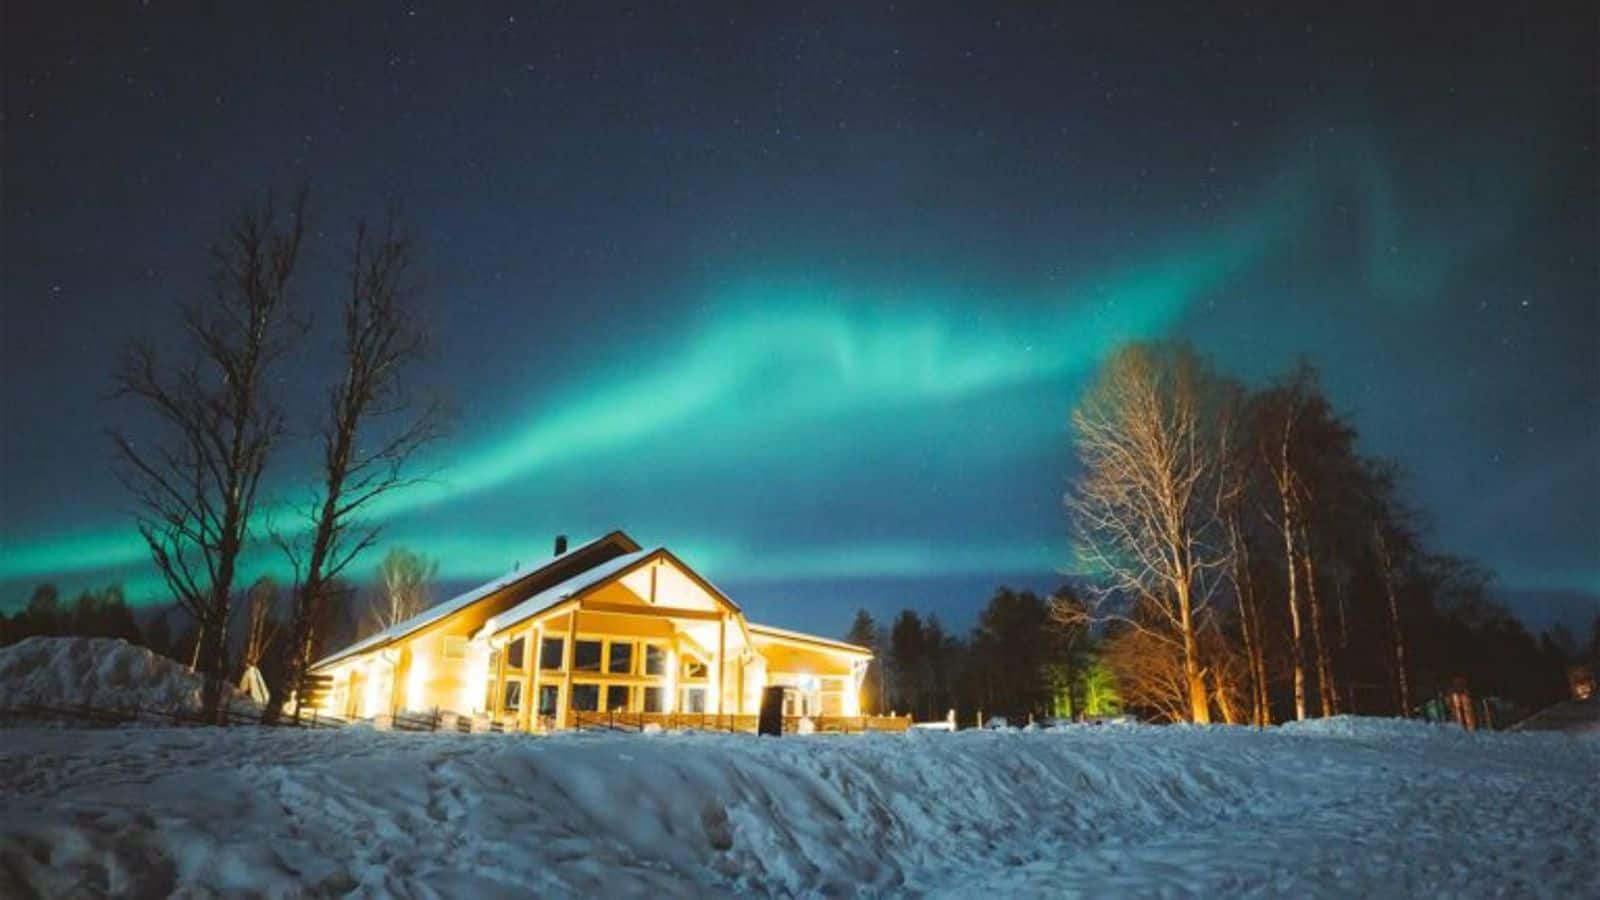 Northern lights in Lapland, Finland: Things to do